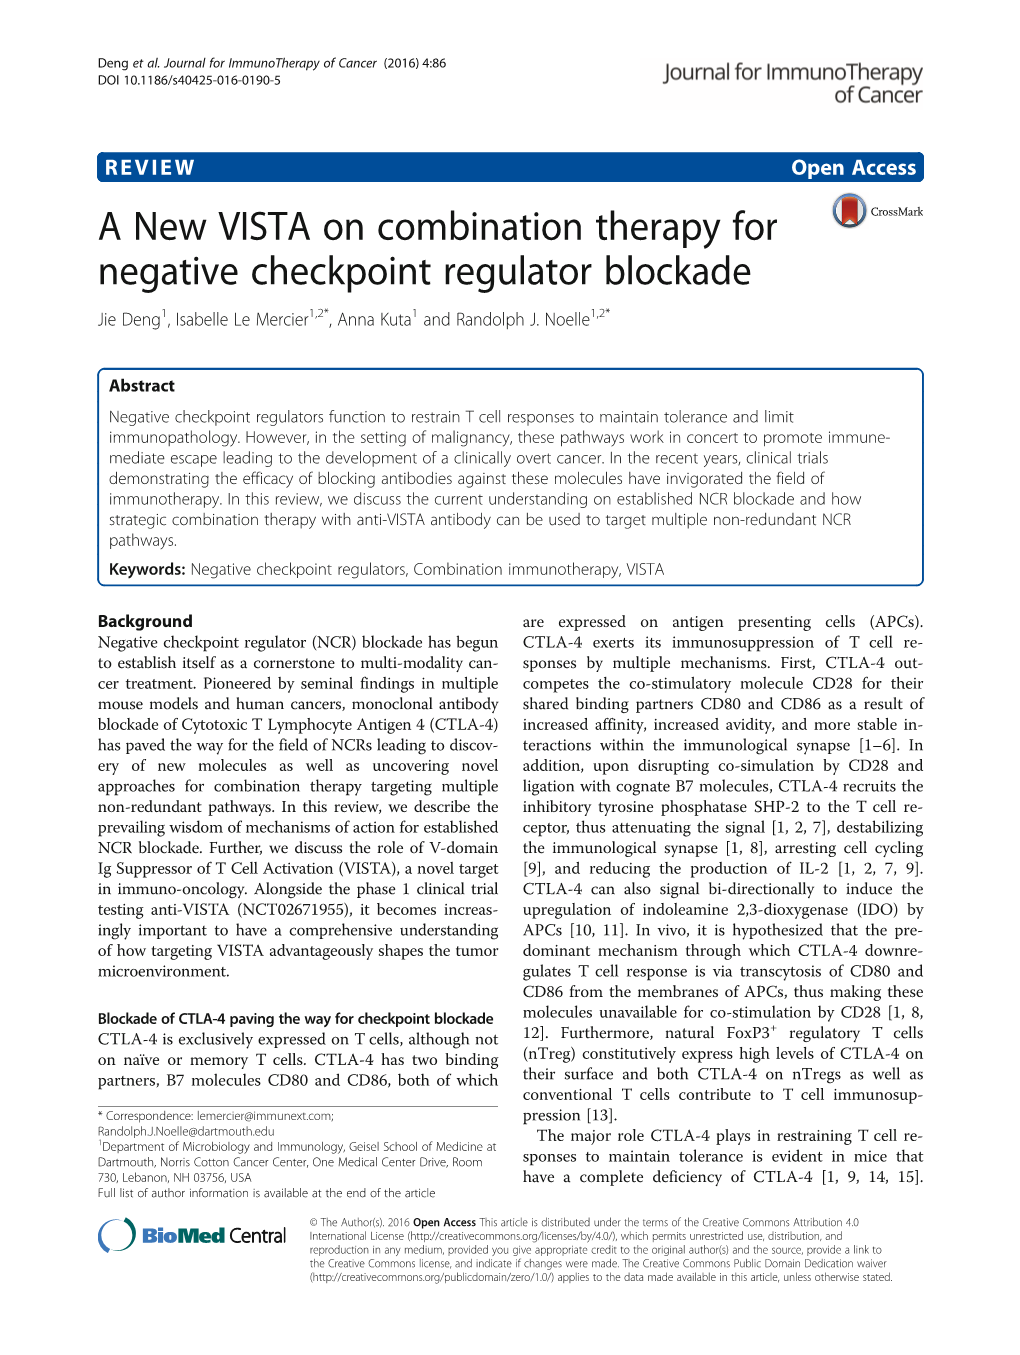 A New VISTA on Combination Therapy for Negative Checkpoint Regulator Blockade Jie Deng1, Isabelle Le Mercier1,2*, Anna Kuta1 and Randolph J